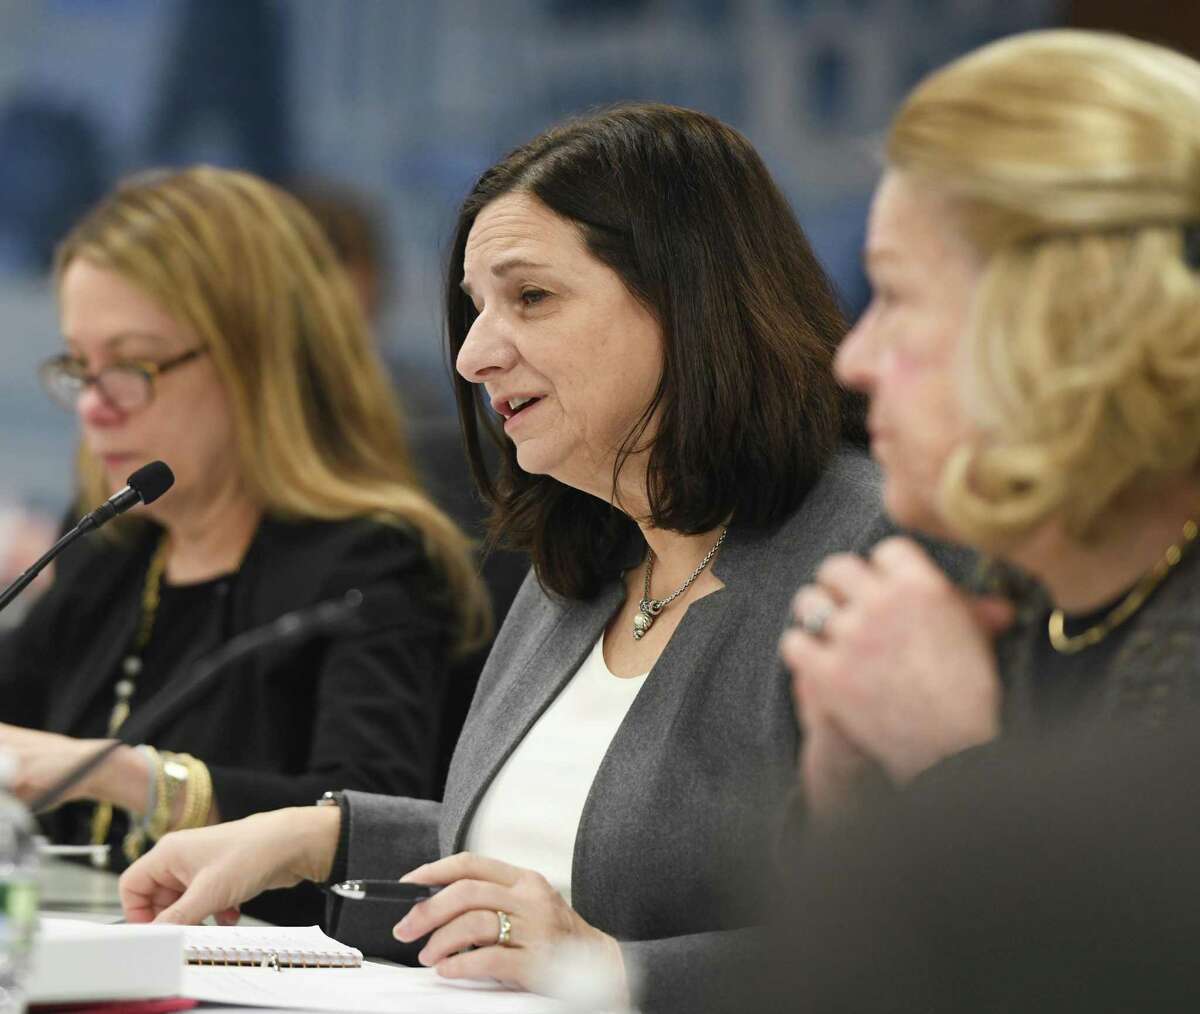 BET Budget Committee member Leslie Moriarty speaks during a Greenwich Board of Estimate and Taxation Budget Committee Meeting at Town Hall in Greenwich in February 2020.